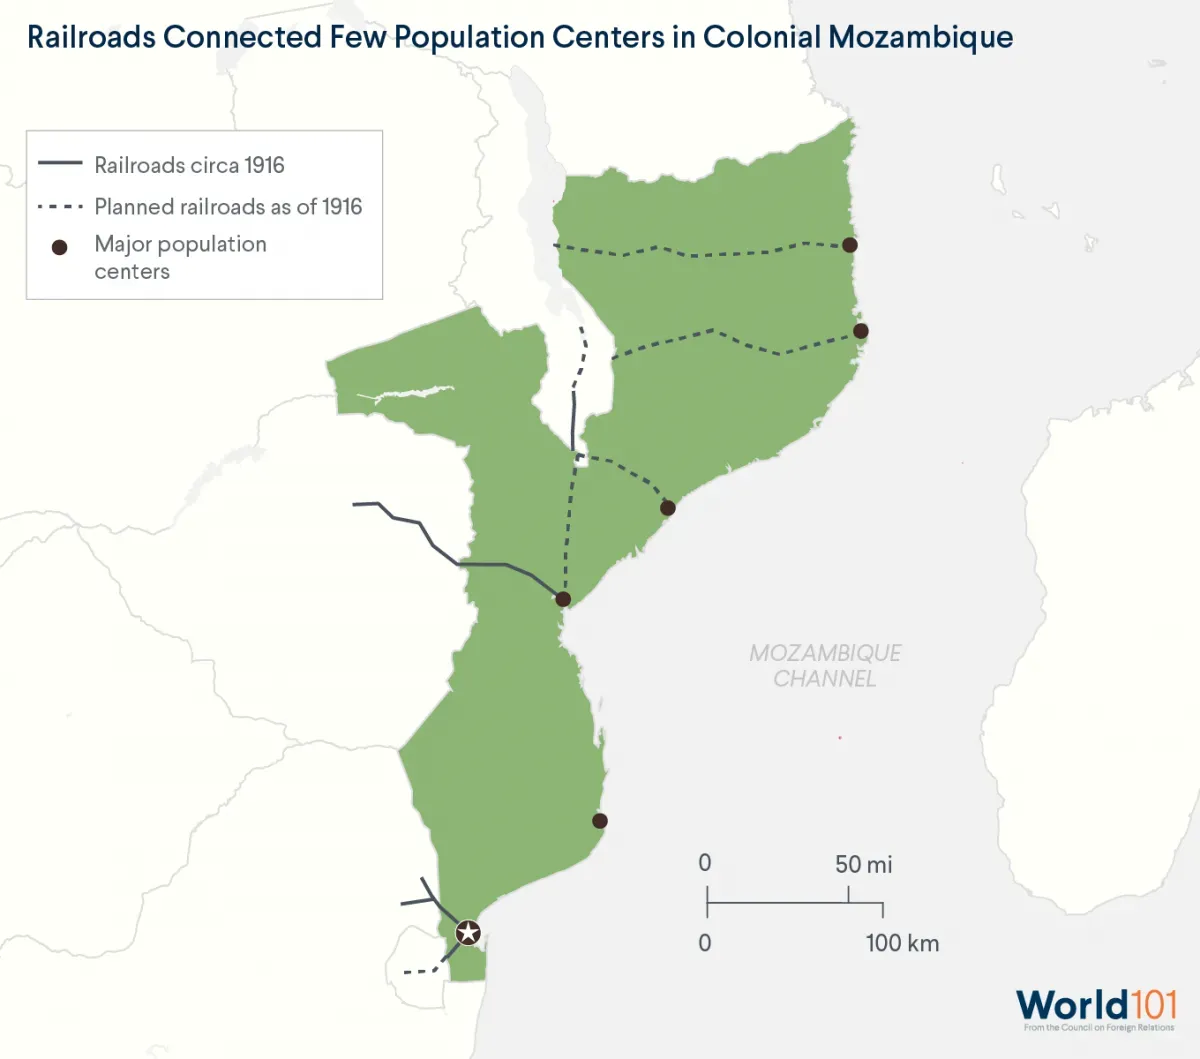 Map showing how the railroads in colonial Mozambique didn't really connect major population centers, but rather connected the resource-rich interior with the coasts.